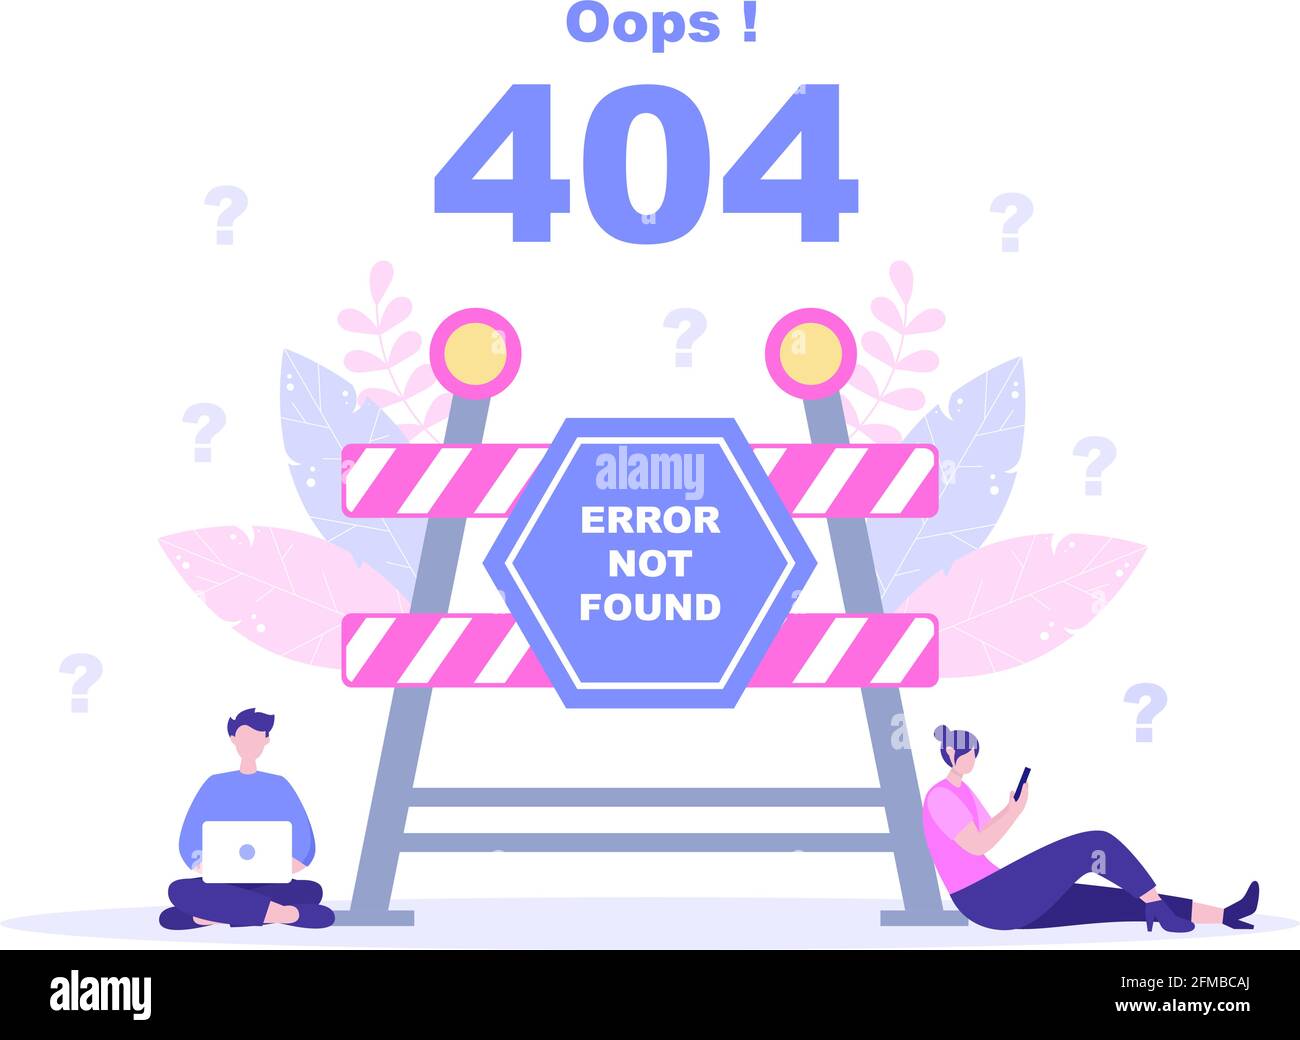 404 Error And Page Not Found Vector Illustration. Lost Connect Problem, Warning Sign, Or Site Breakdown. Landing Page Template Stock Vector